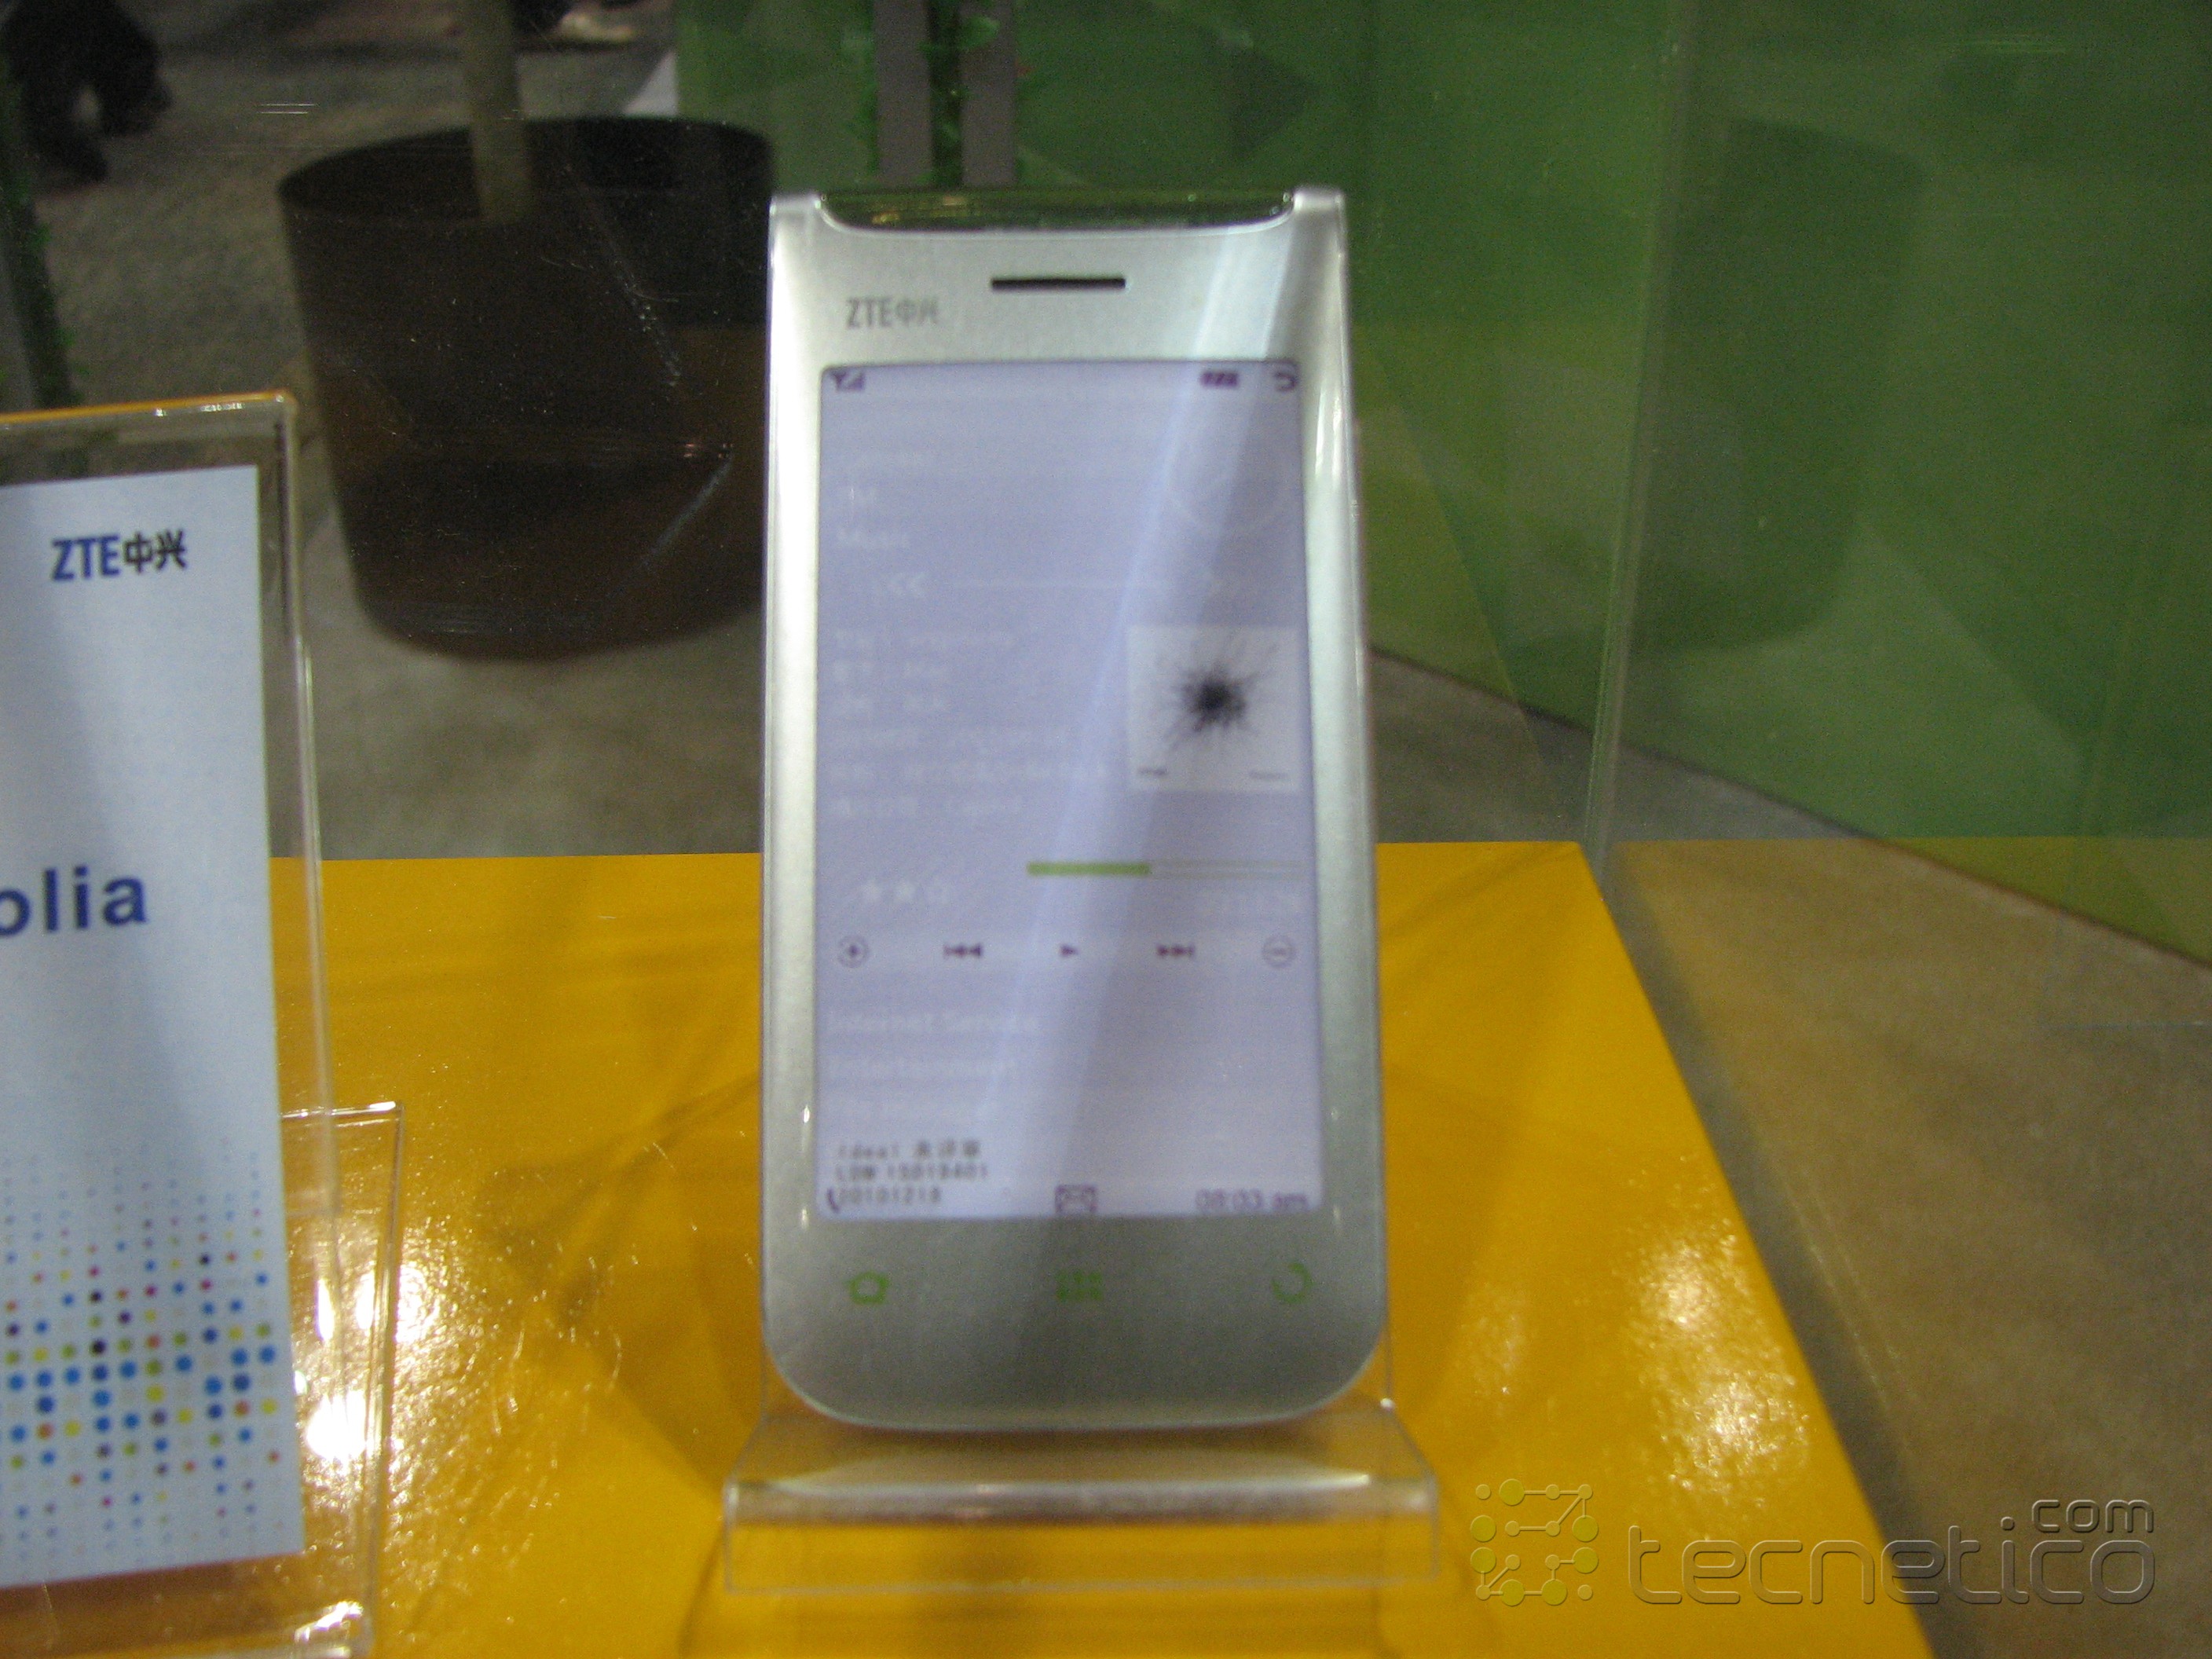 Htc evo view 4gtm review